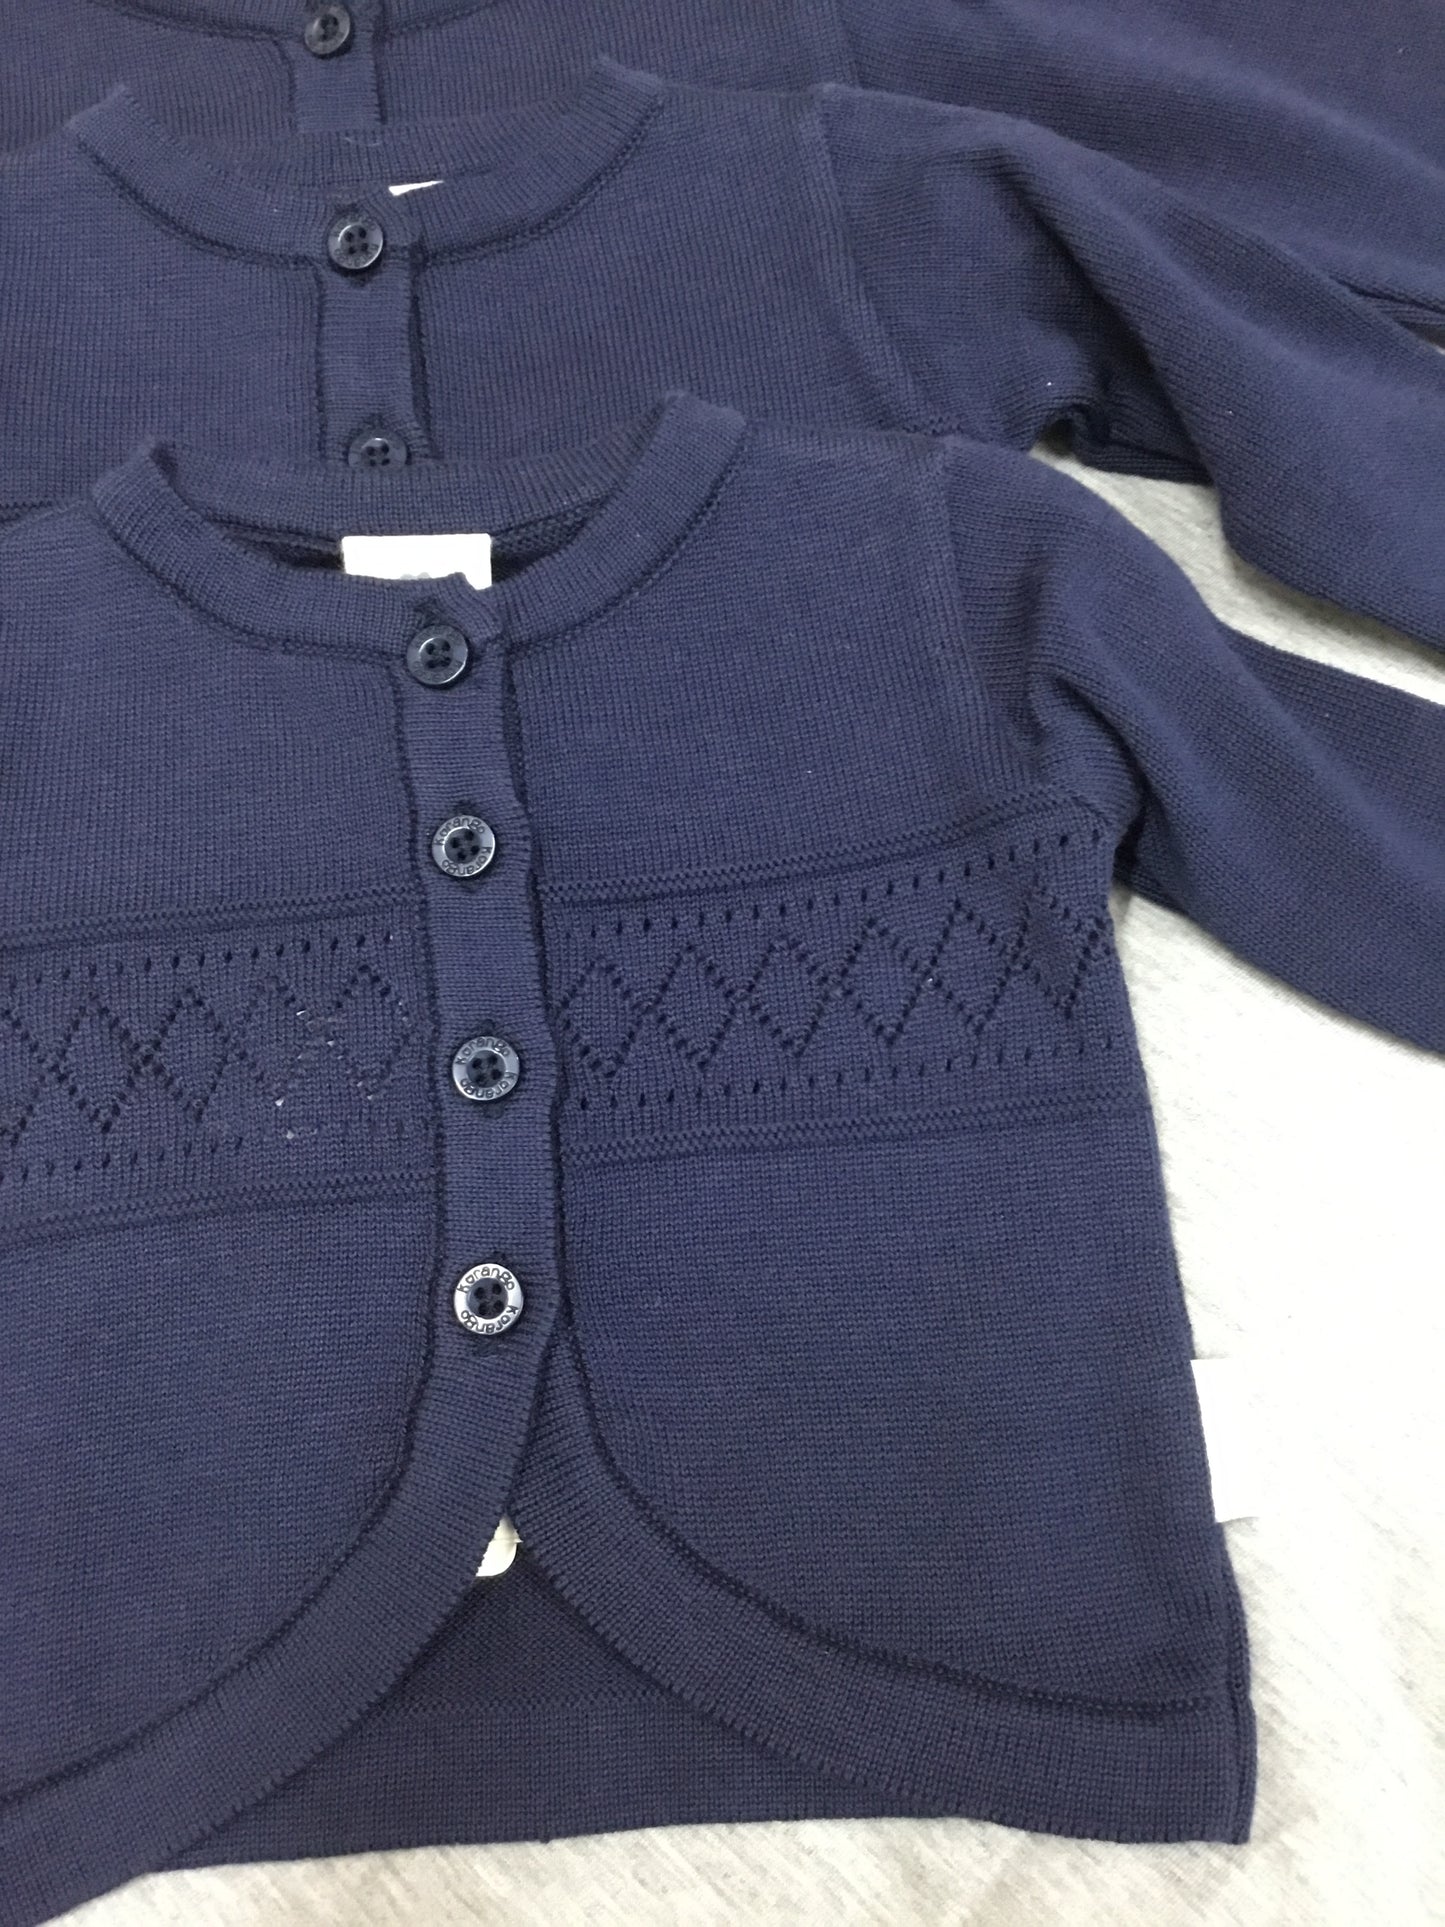 Pointelle Knit Cardigan Navy Only!